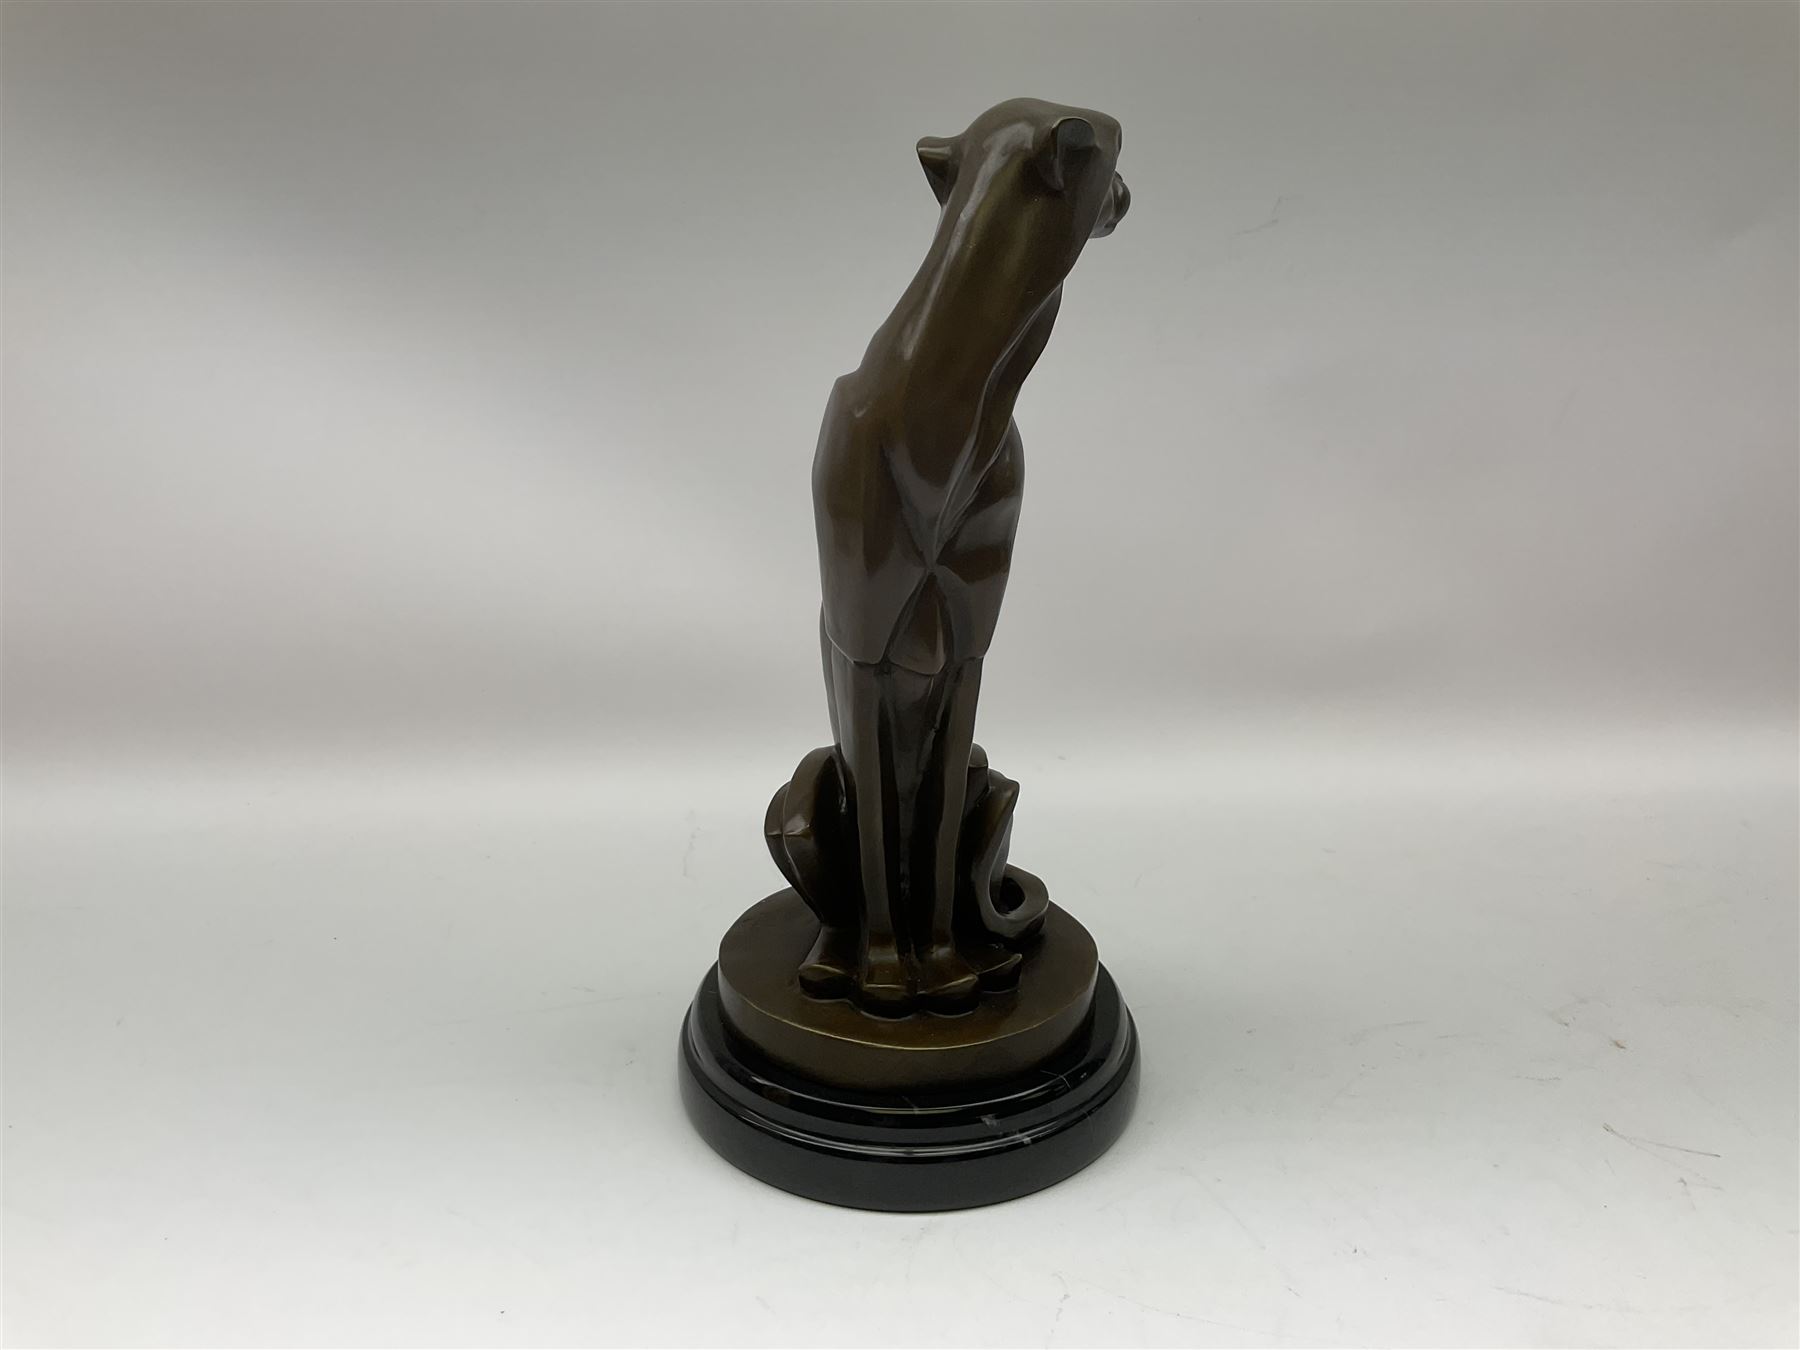 Stylised bronze figure of a seated cheetah after 'Milo' with foundry mark on circular base - Image 6 of 8